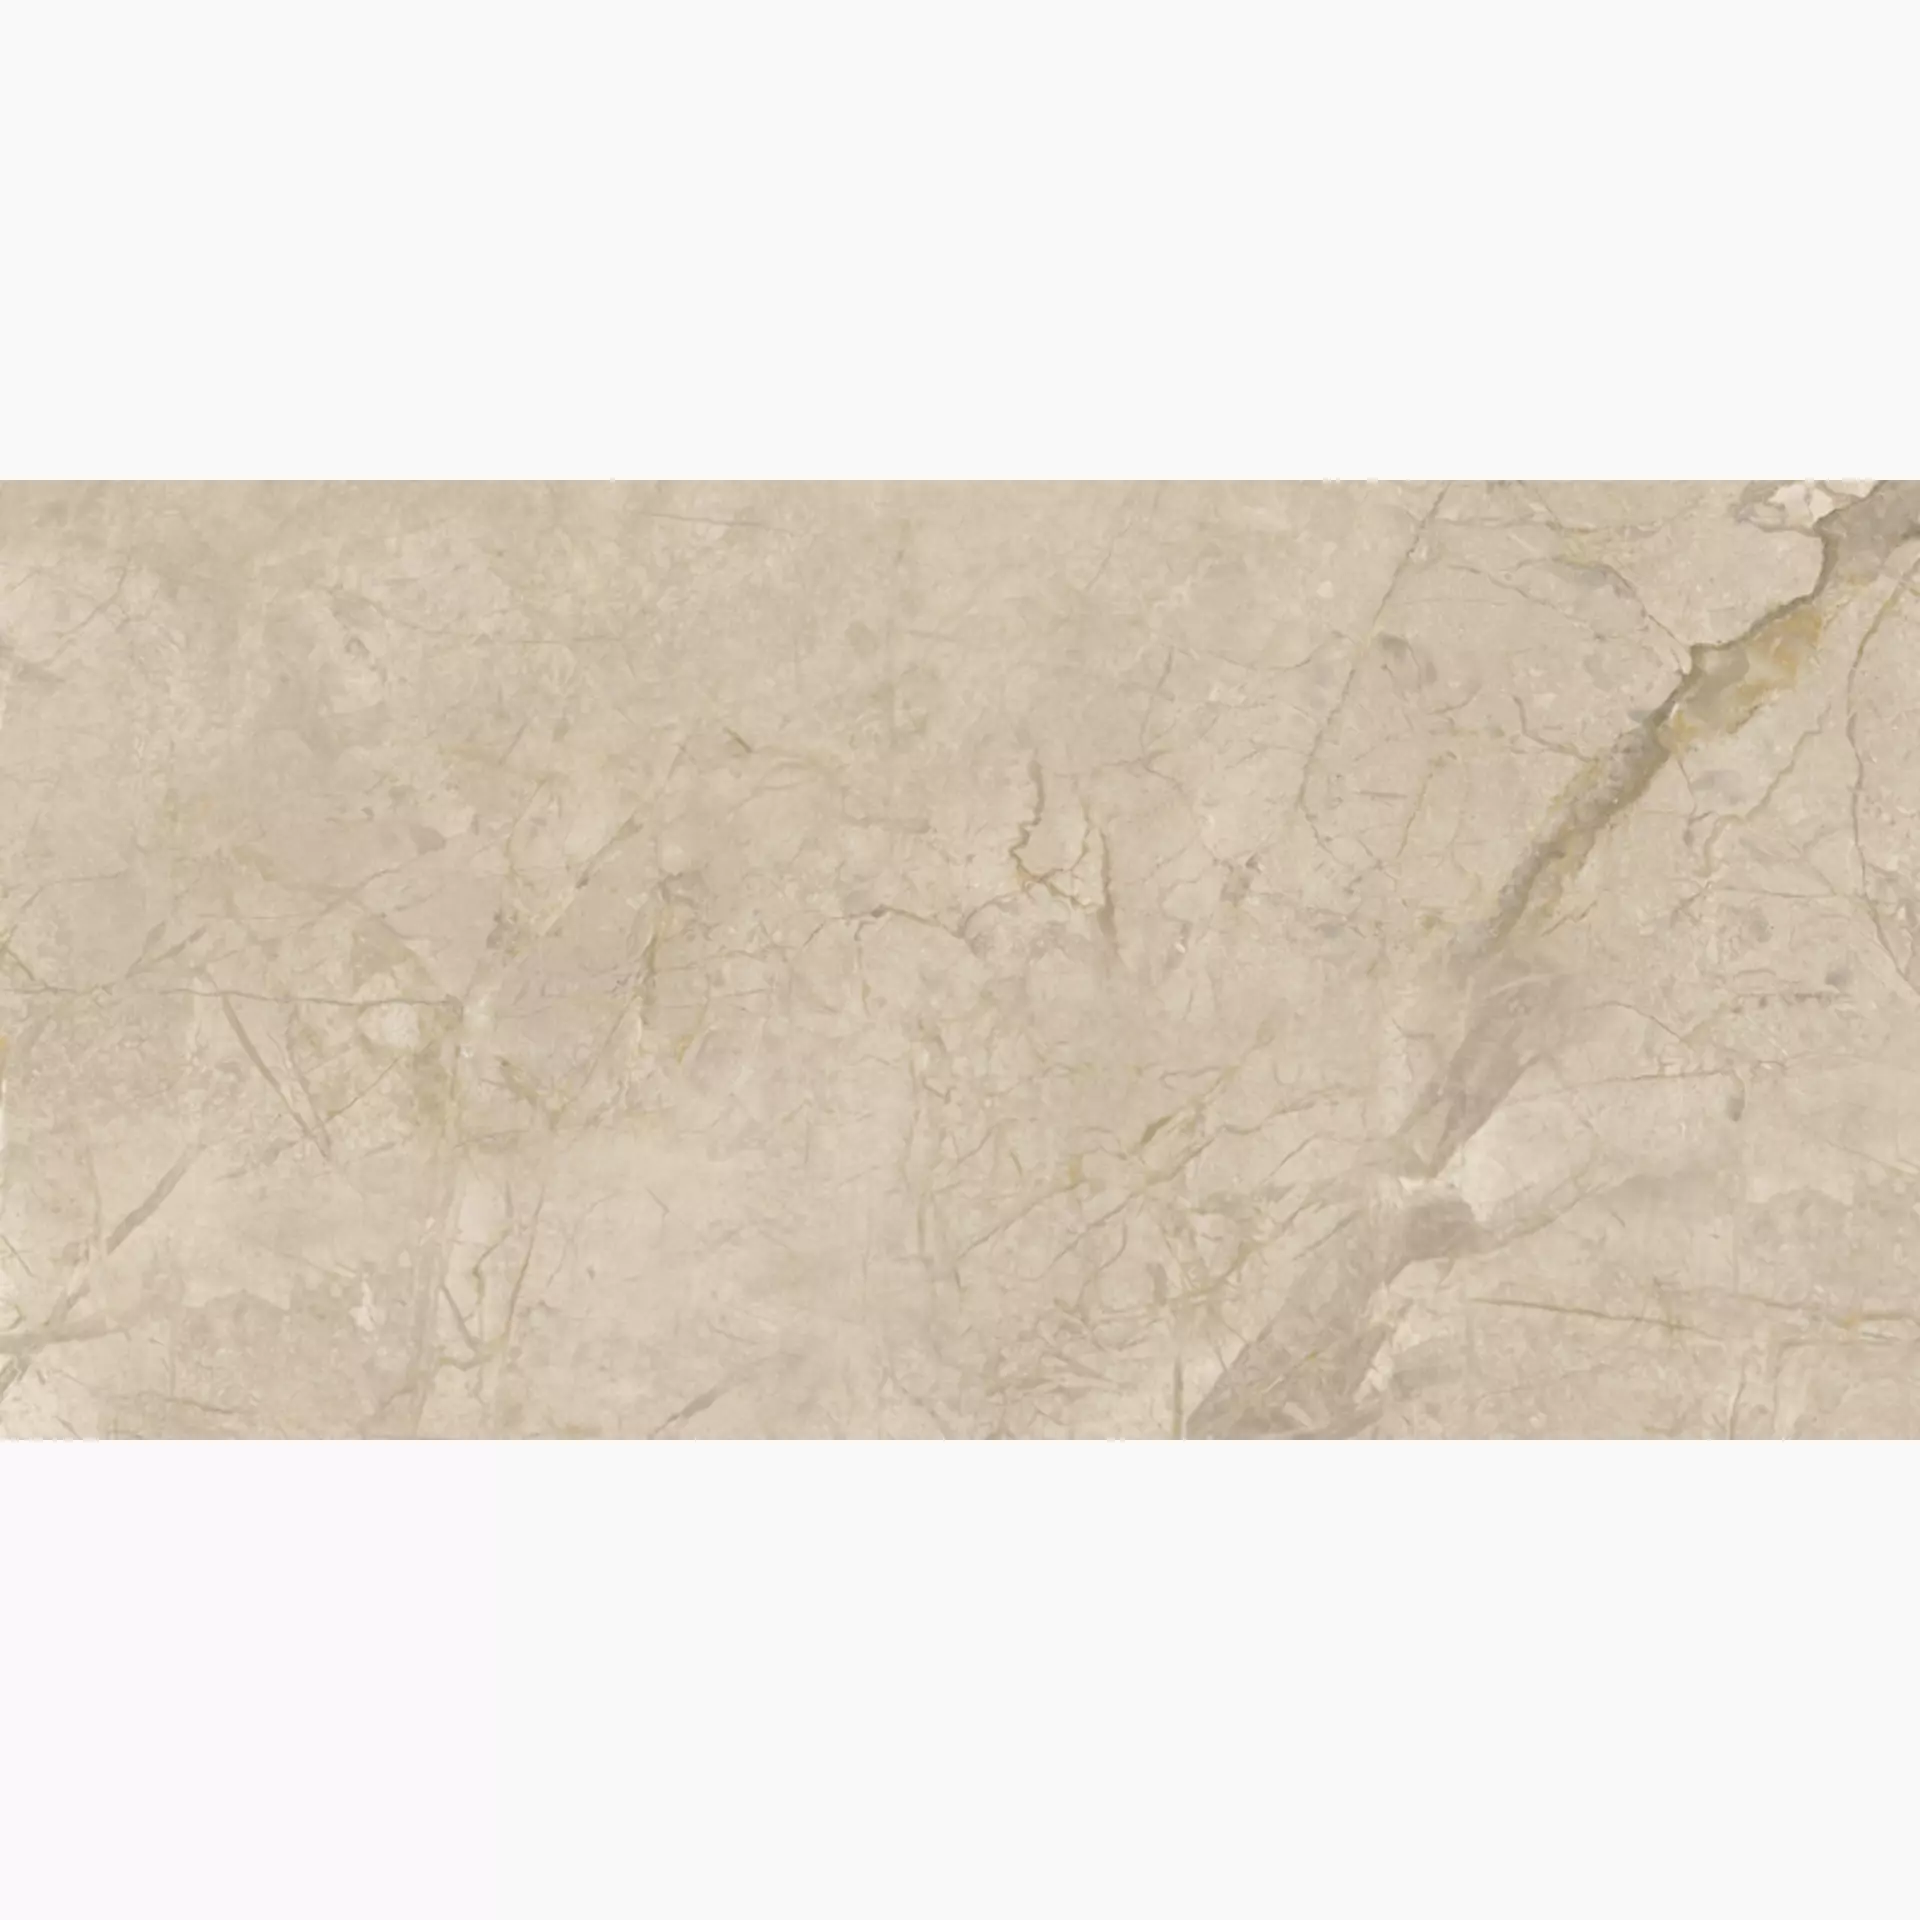 Keope Elements Lux Crema Beige Lappato 32413233 60x120cm rectified 9mm